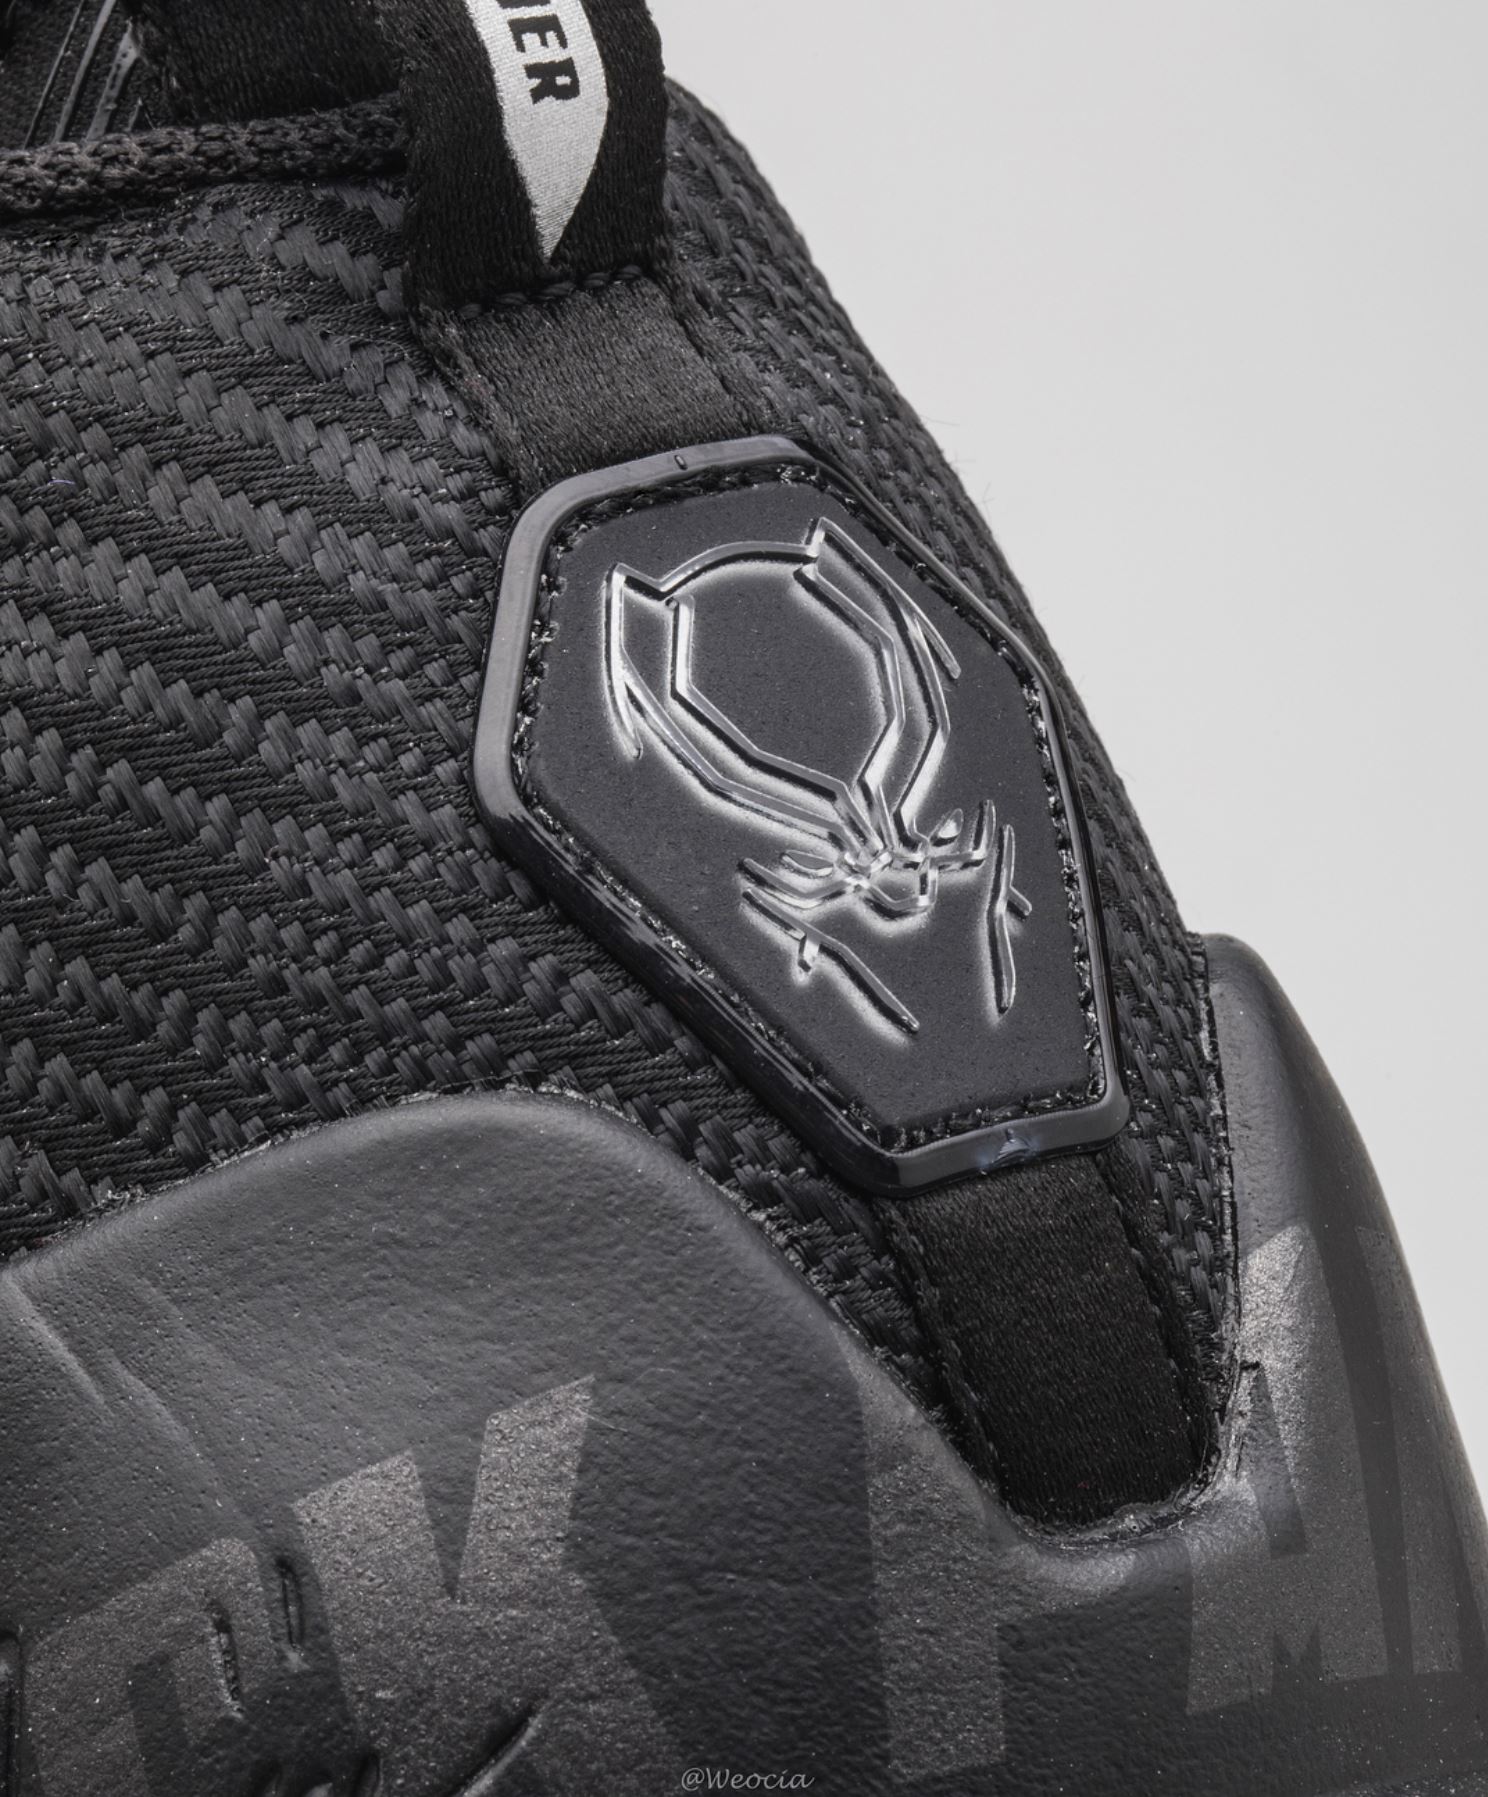 klay thompson black panther shoes